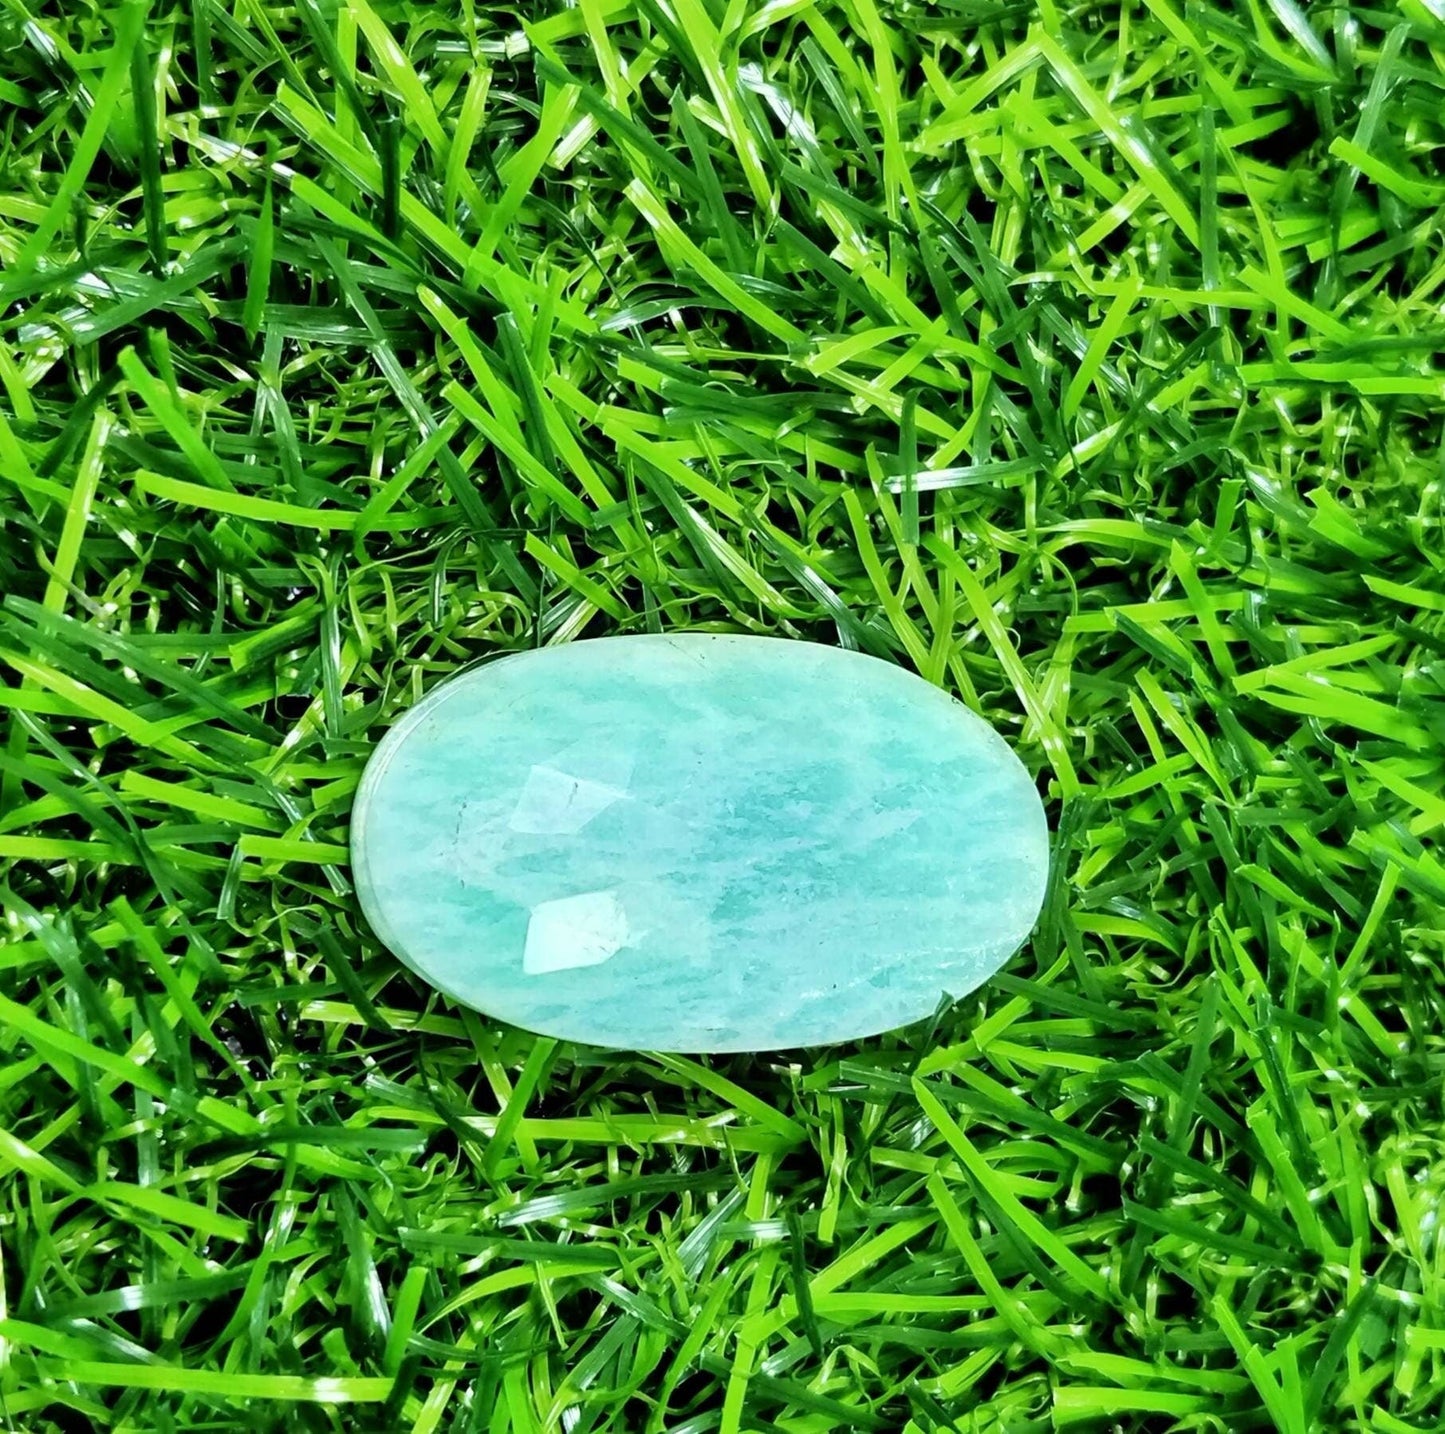 ARSAA GEMS AND MINERALSNatural top quality pair of rose cut/faceted amazonite cabochon - Premium  from ARSAA GEMS AND MINERALS - Just $20.00! Shop now at ARSAA GEMS AND MINERALS